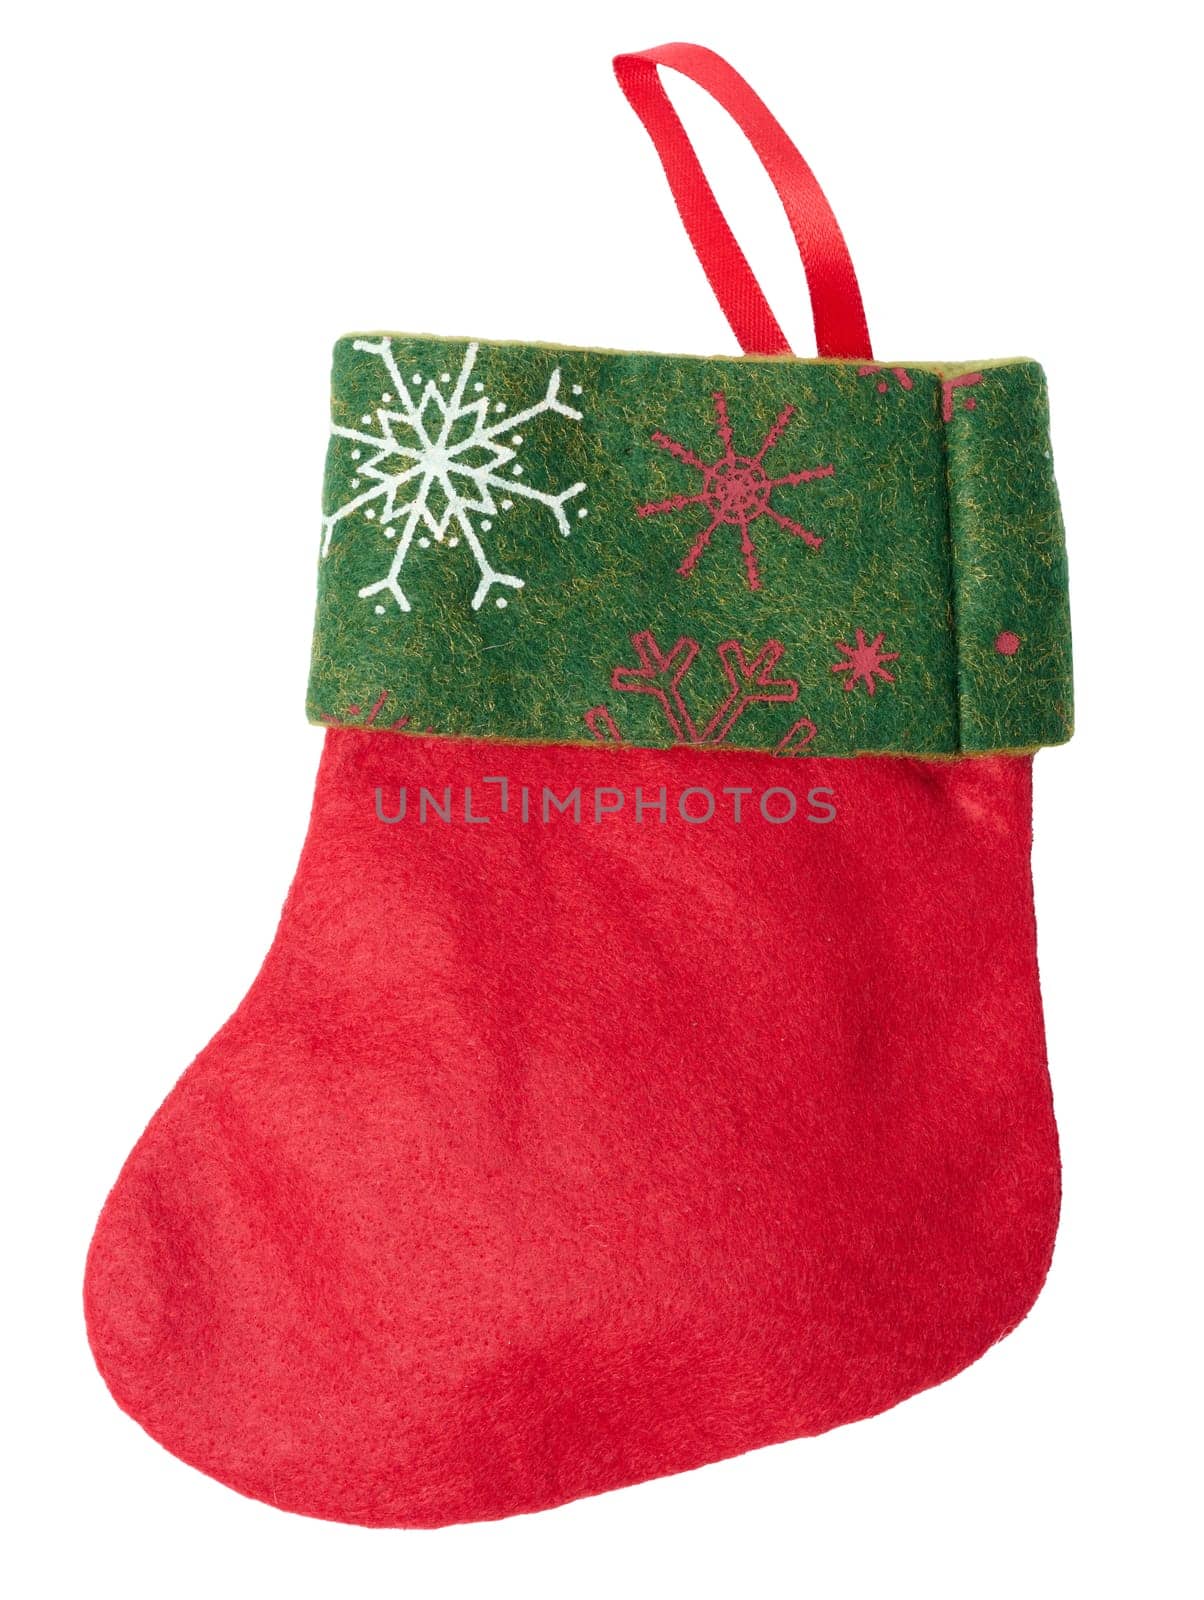 Red felt Christmas sock for gifts on a white isolated background by ndanko